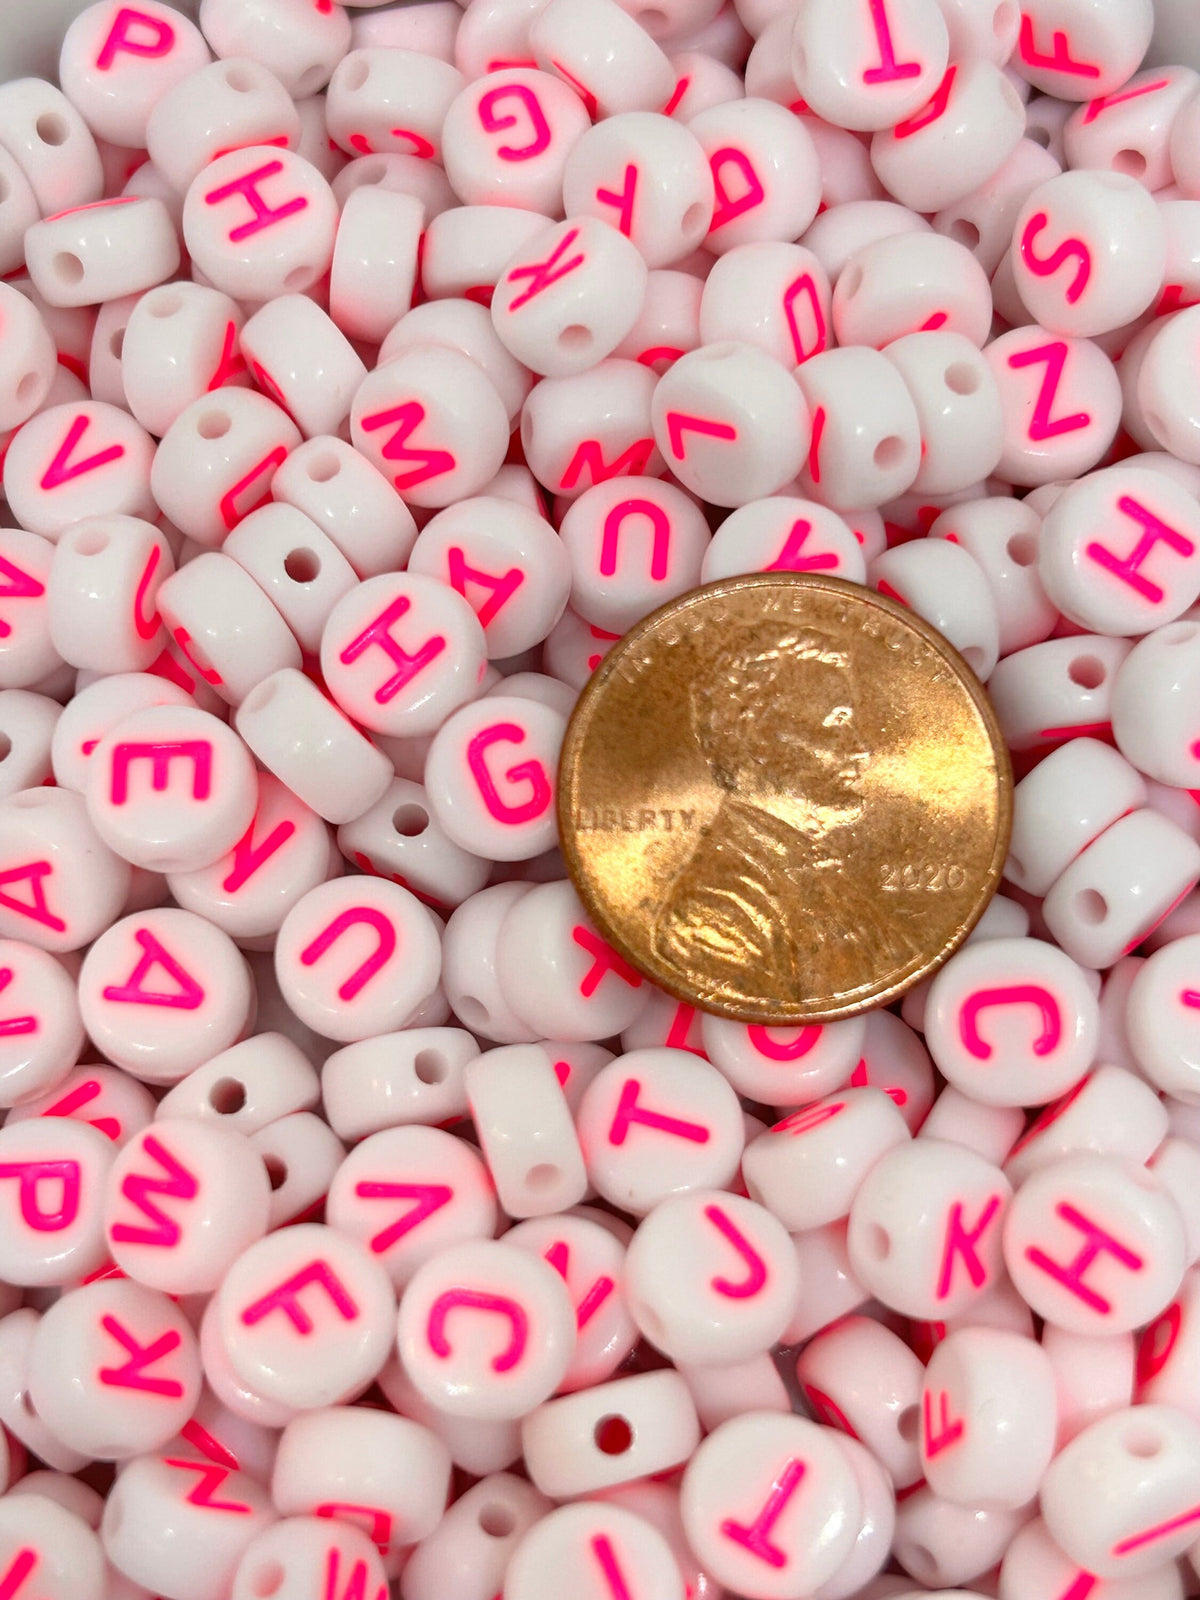 Neon Pink Letter Alphabet Beads, Spacer Beads, DIY Jewelry, Round DIY  letter beads